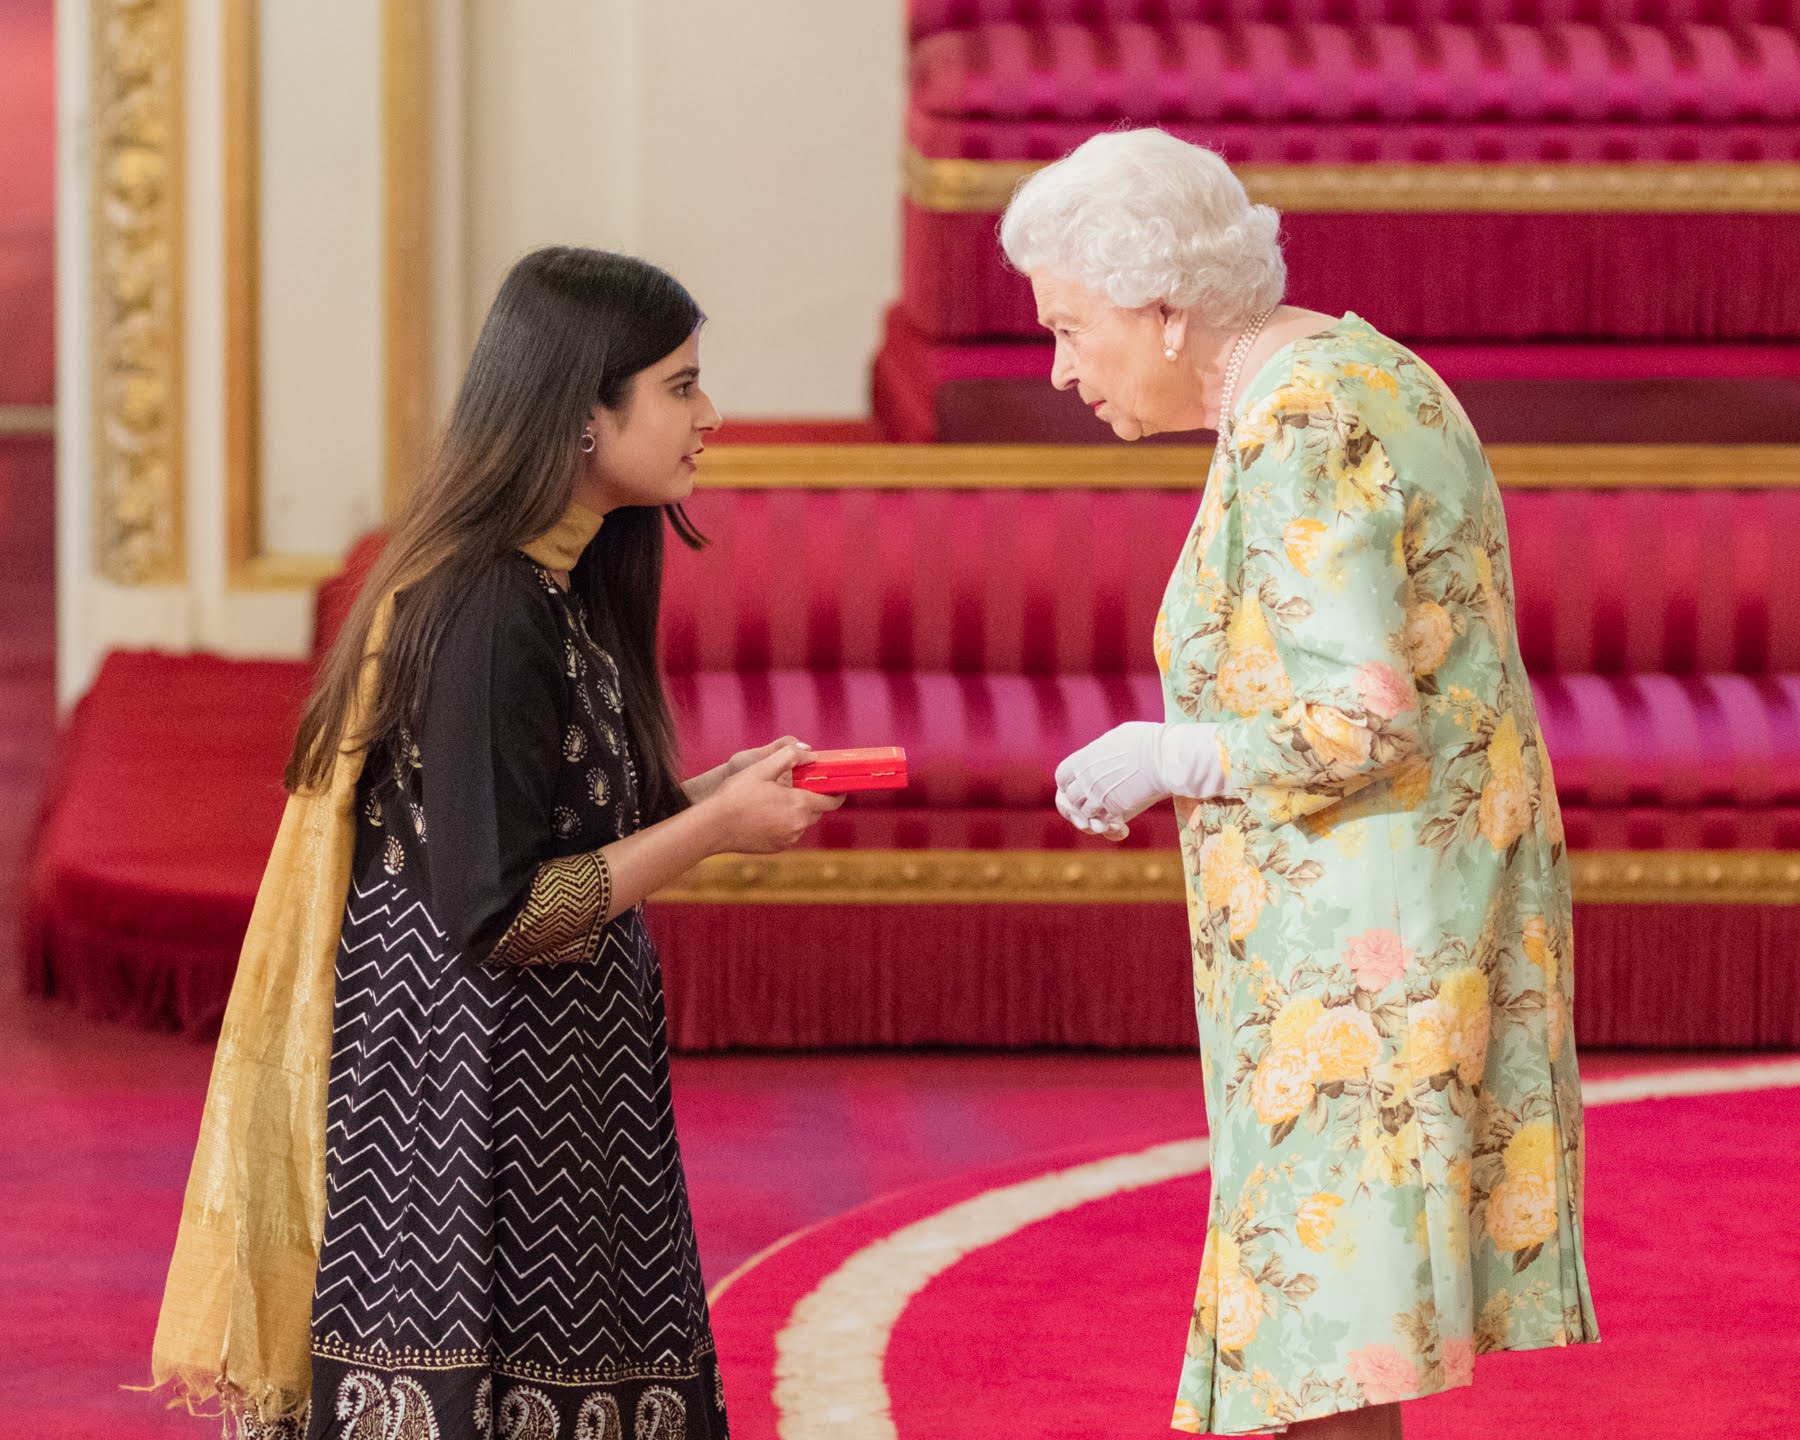 Mahnoor Syed 2018 Queen's Young Leader from Pakistan